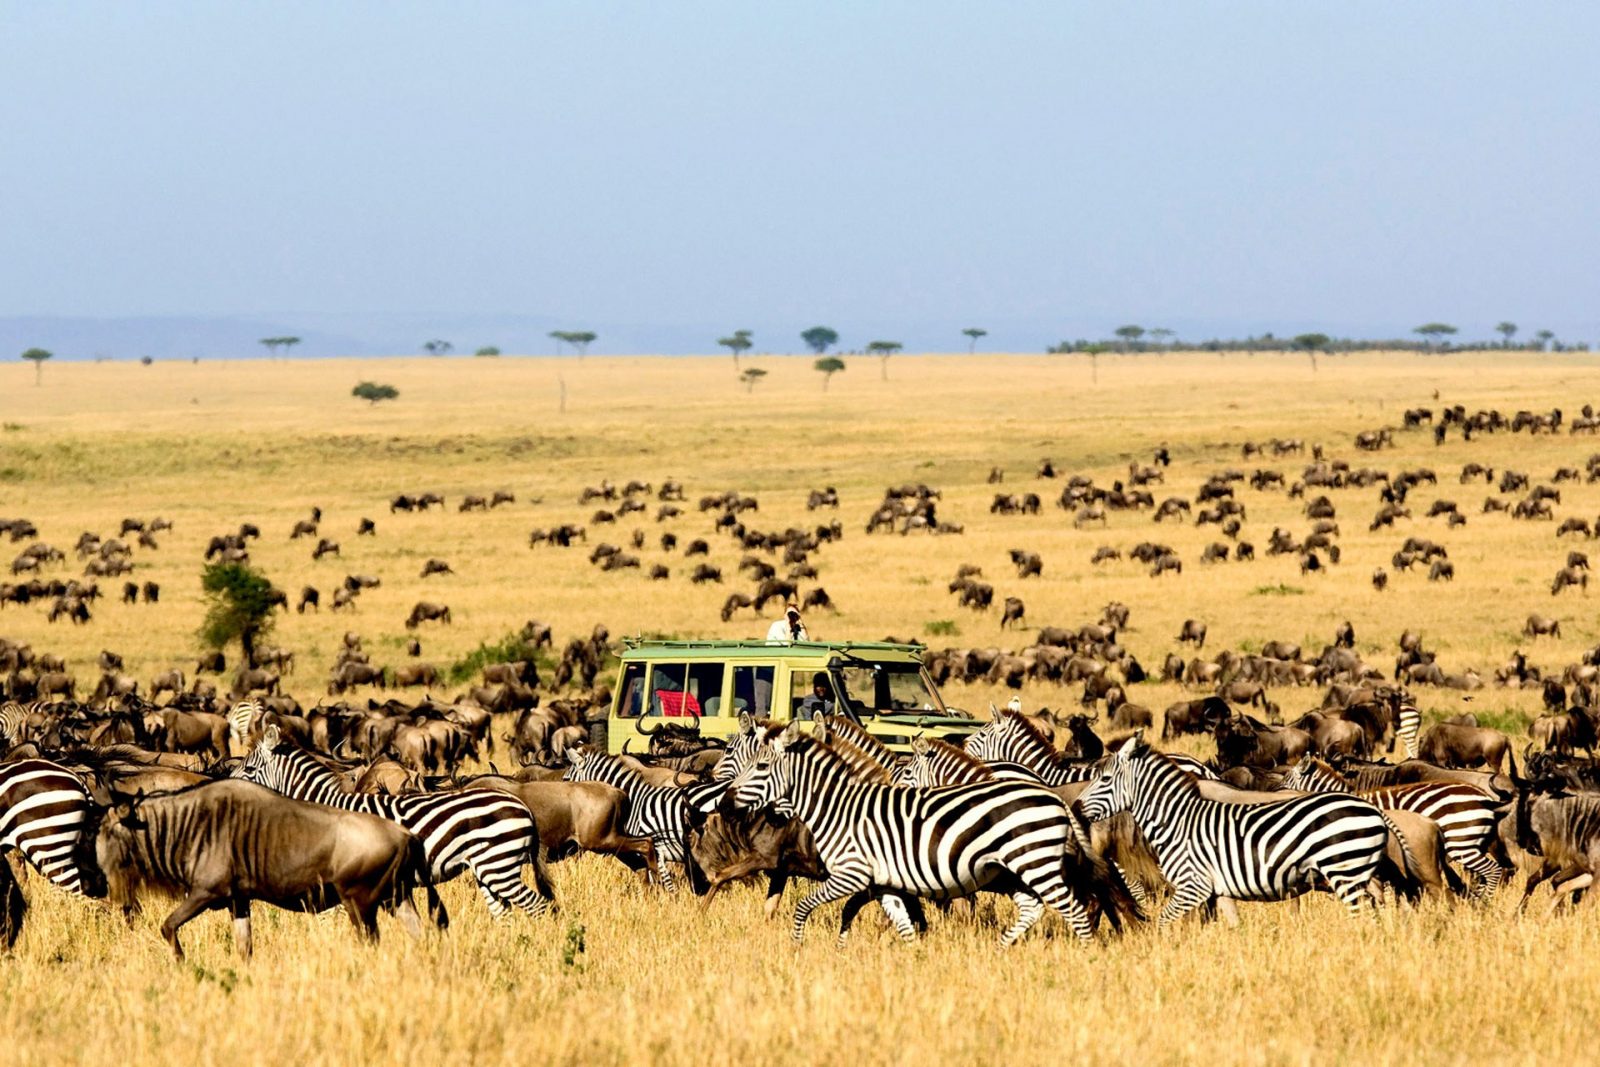 Full-day game drive in the Masai Mara National Reserve